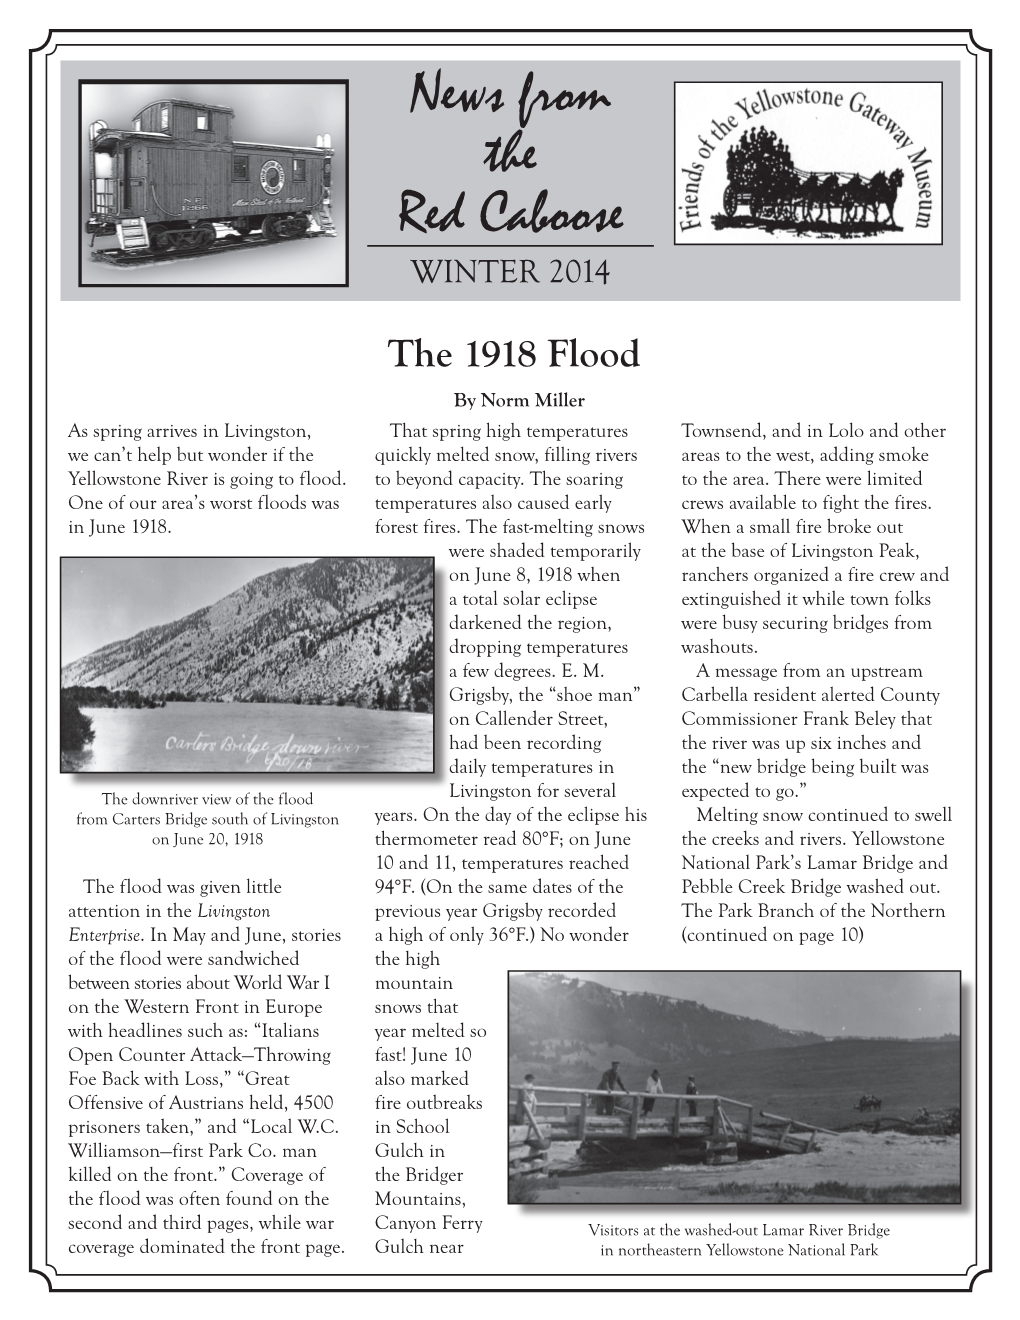 News from the Red Caboose WINTER 2014